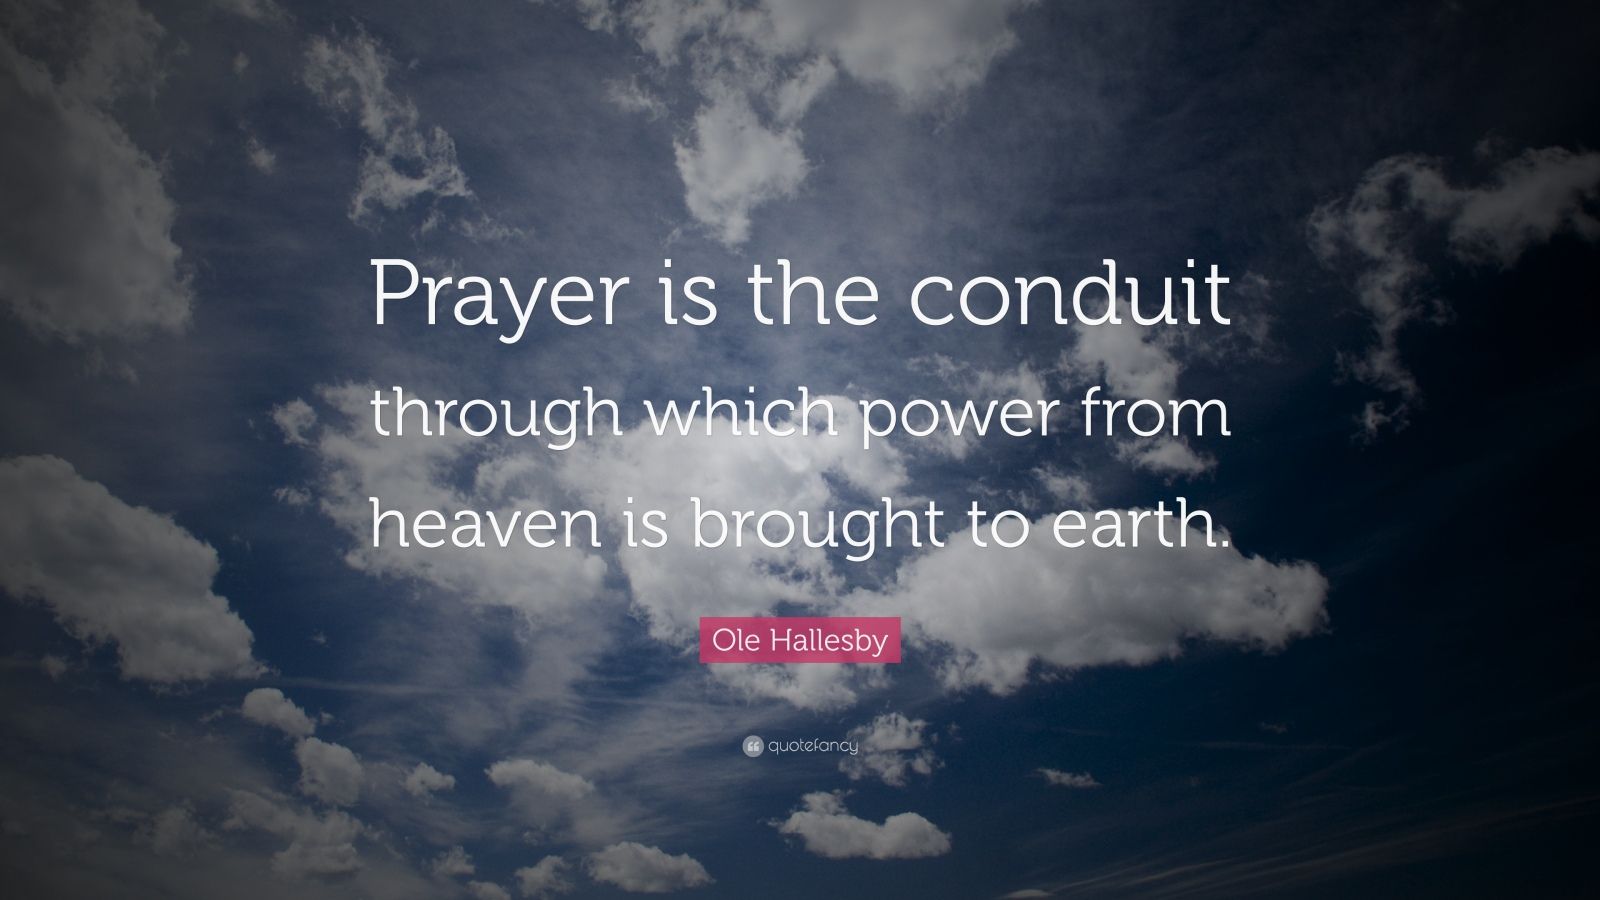 Ole Hallesby Quote: “Prayer is the conduit through which power from ...